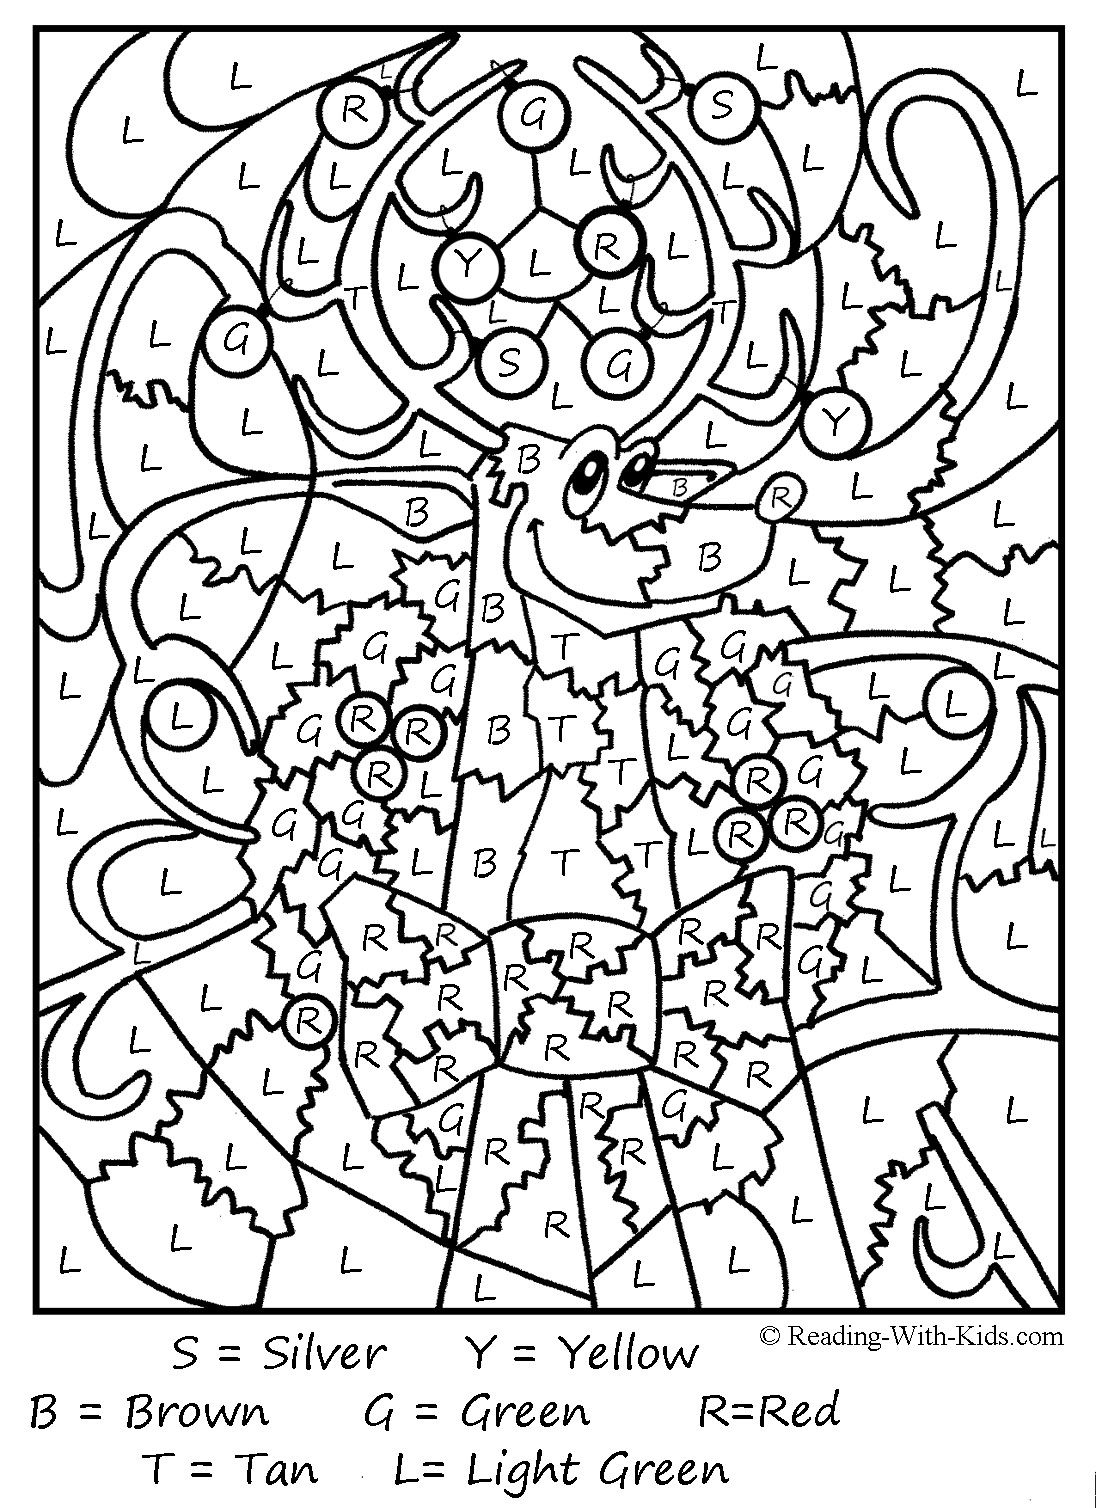 Illuminated Alphabet Coloring Pages 29 Color Letters Coloring Pages Download Coloring Sheets